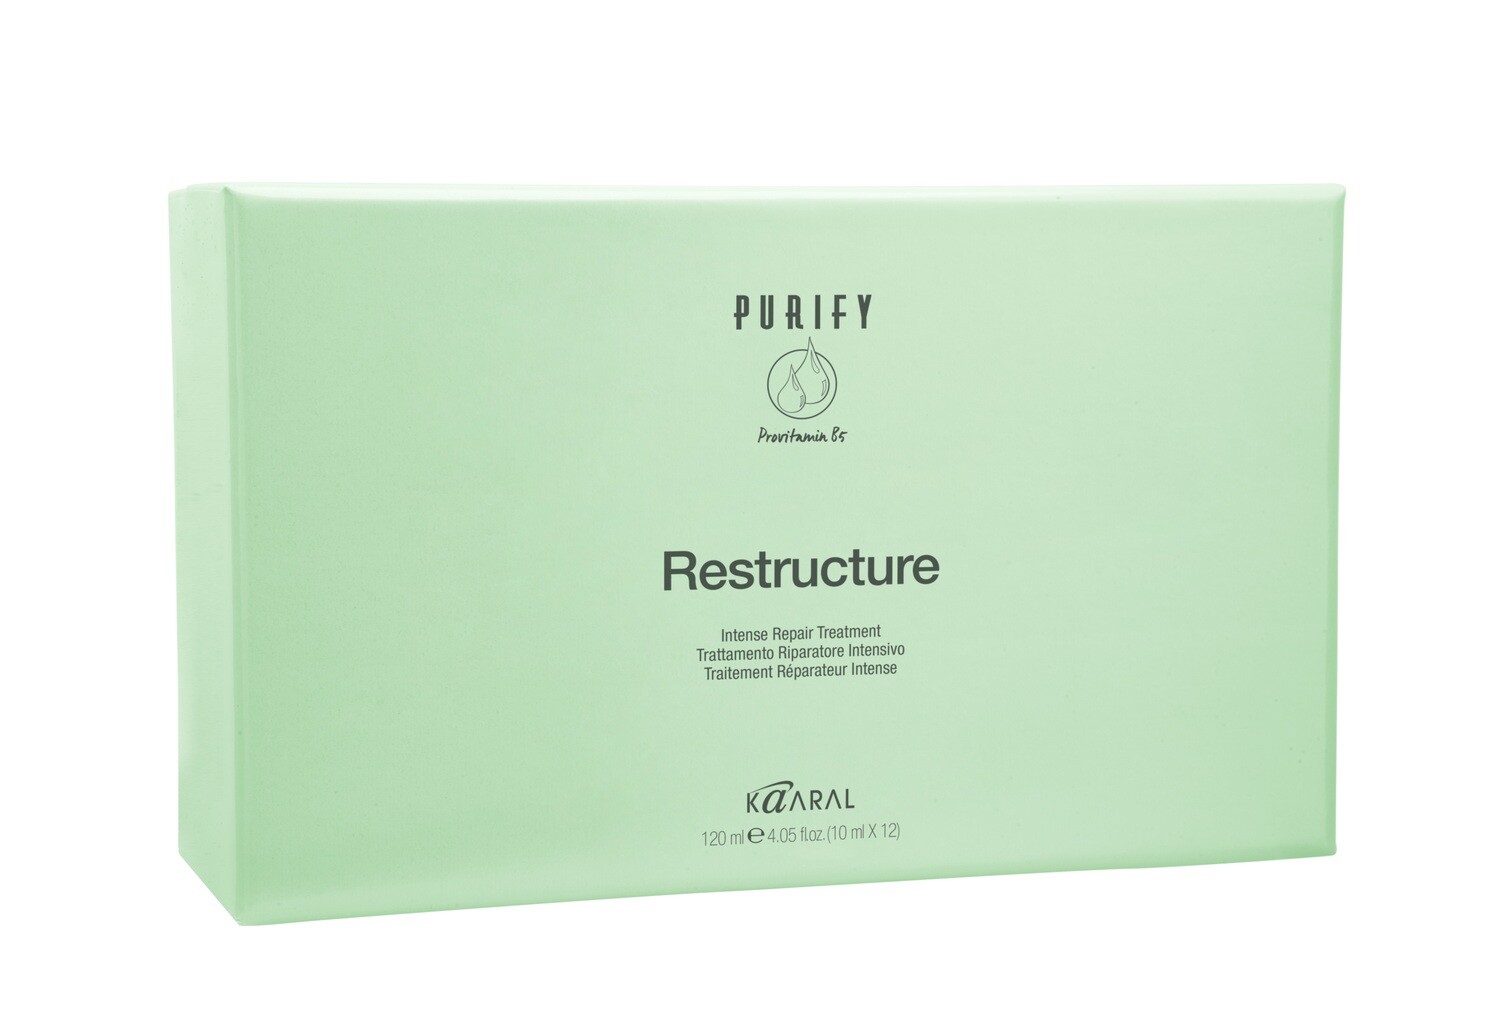 KAARAL PURIFY RESTRUCTURE TRATTAMENTO RIPARATORE INTENSIVO 12 FIALE 10ML